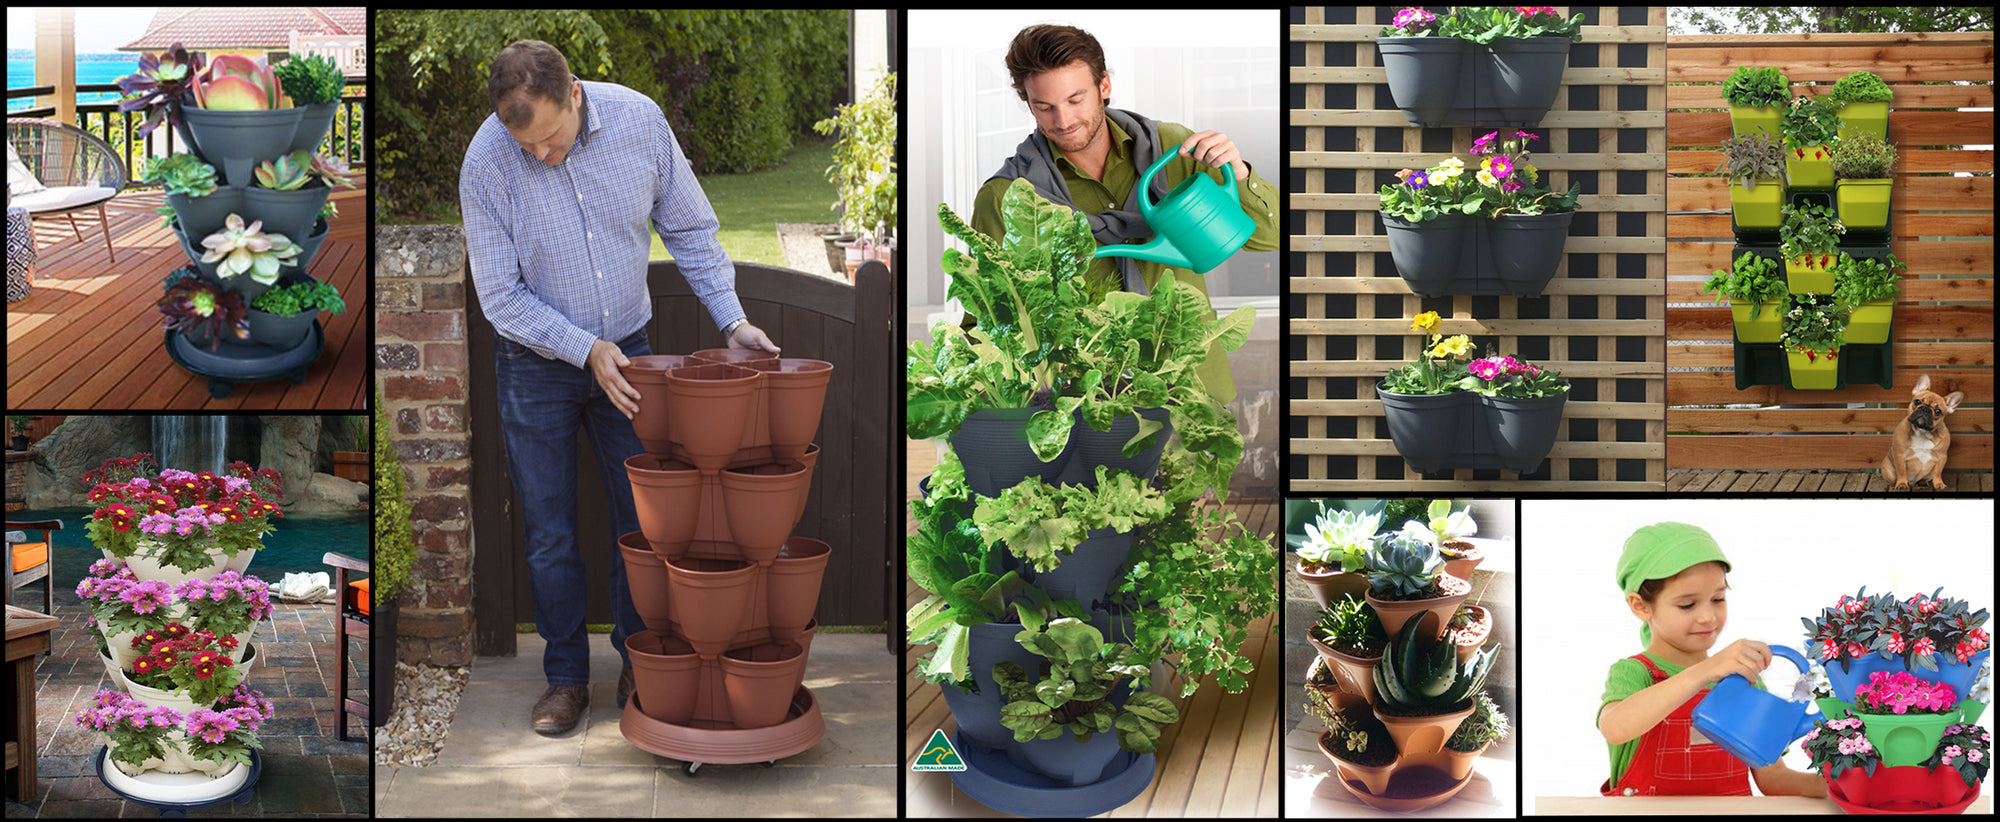 Stackapots provide a range of Stackable Pots and Planters for Vertical Gardening. Vertical Gardens of Stackable pots, Wall Planters, Post Planters and Hanging Planters made here in Australia. They will accept  self-watering or Hydroponic systems